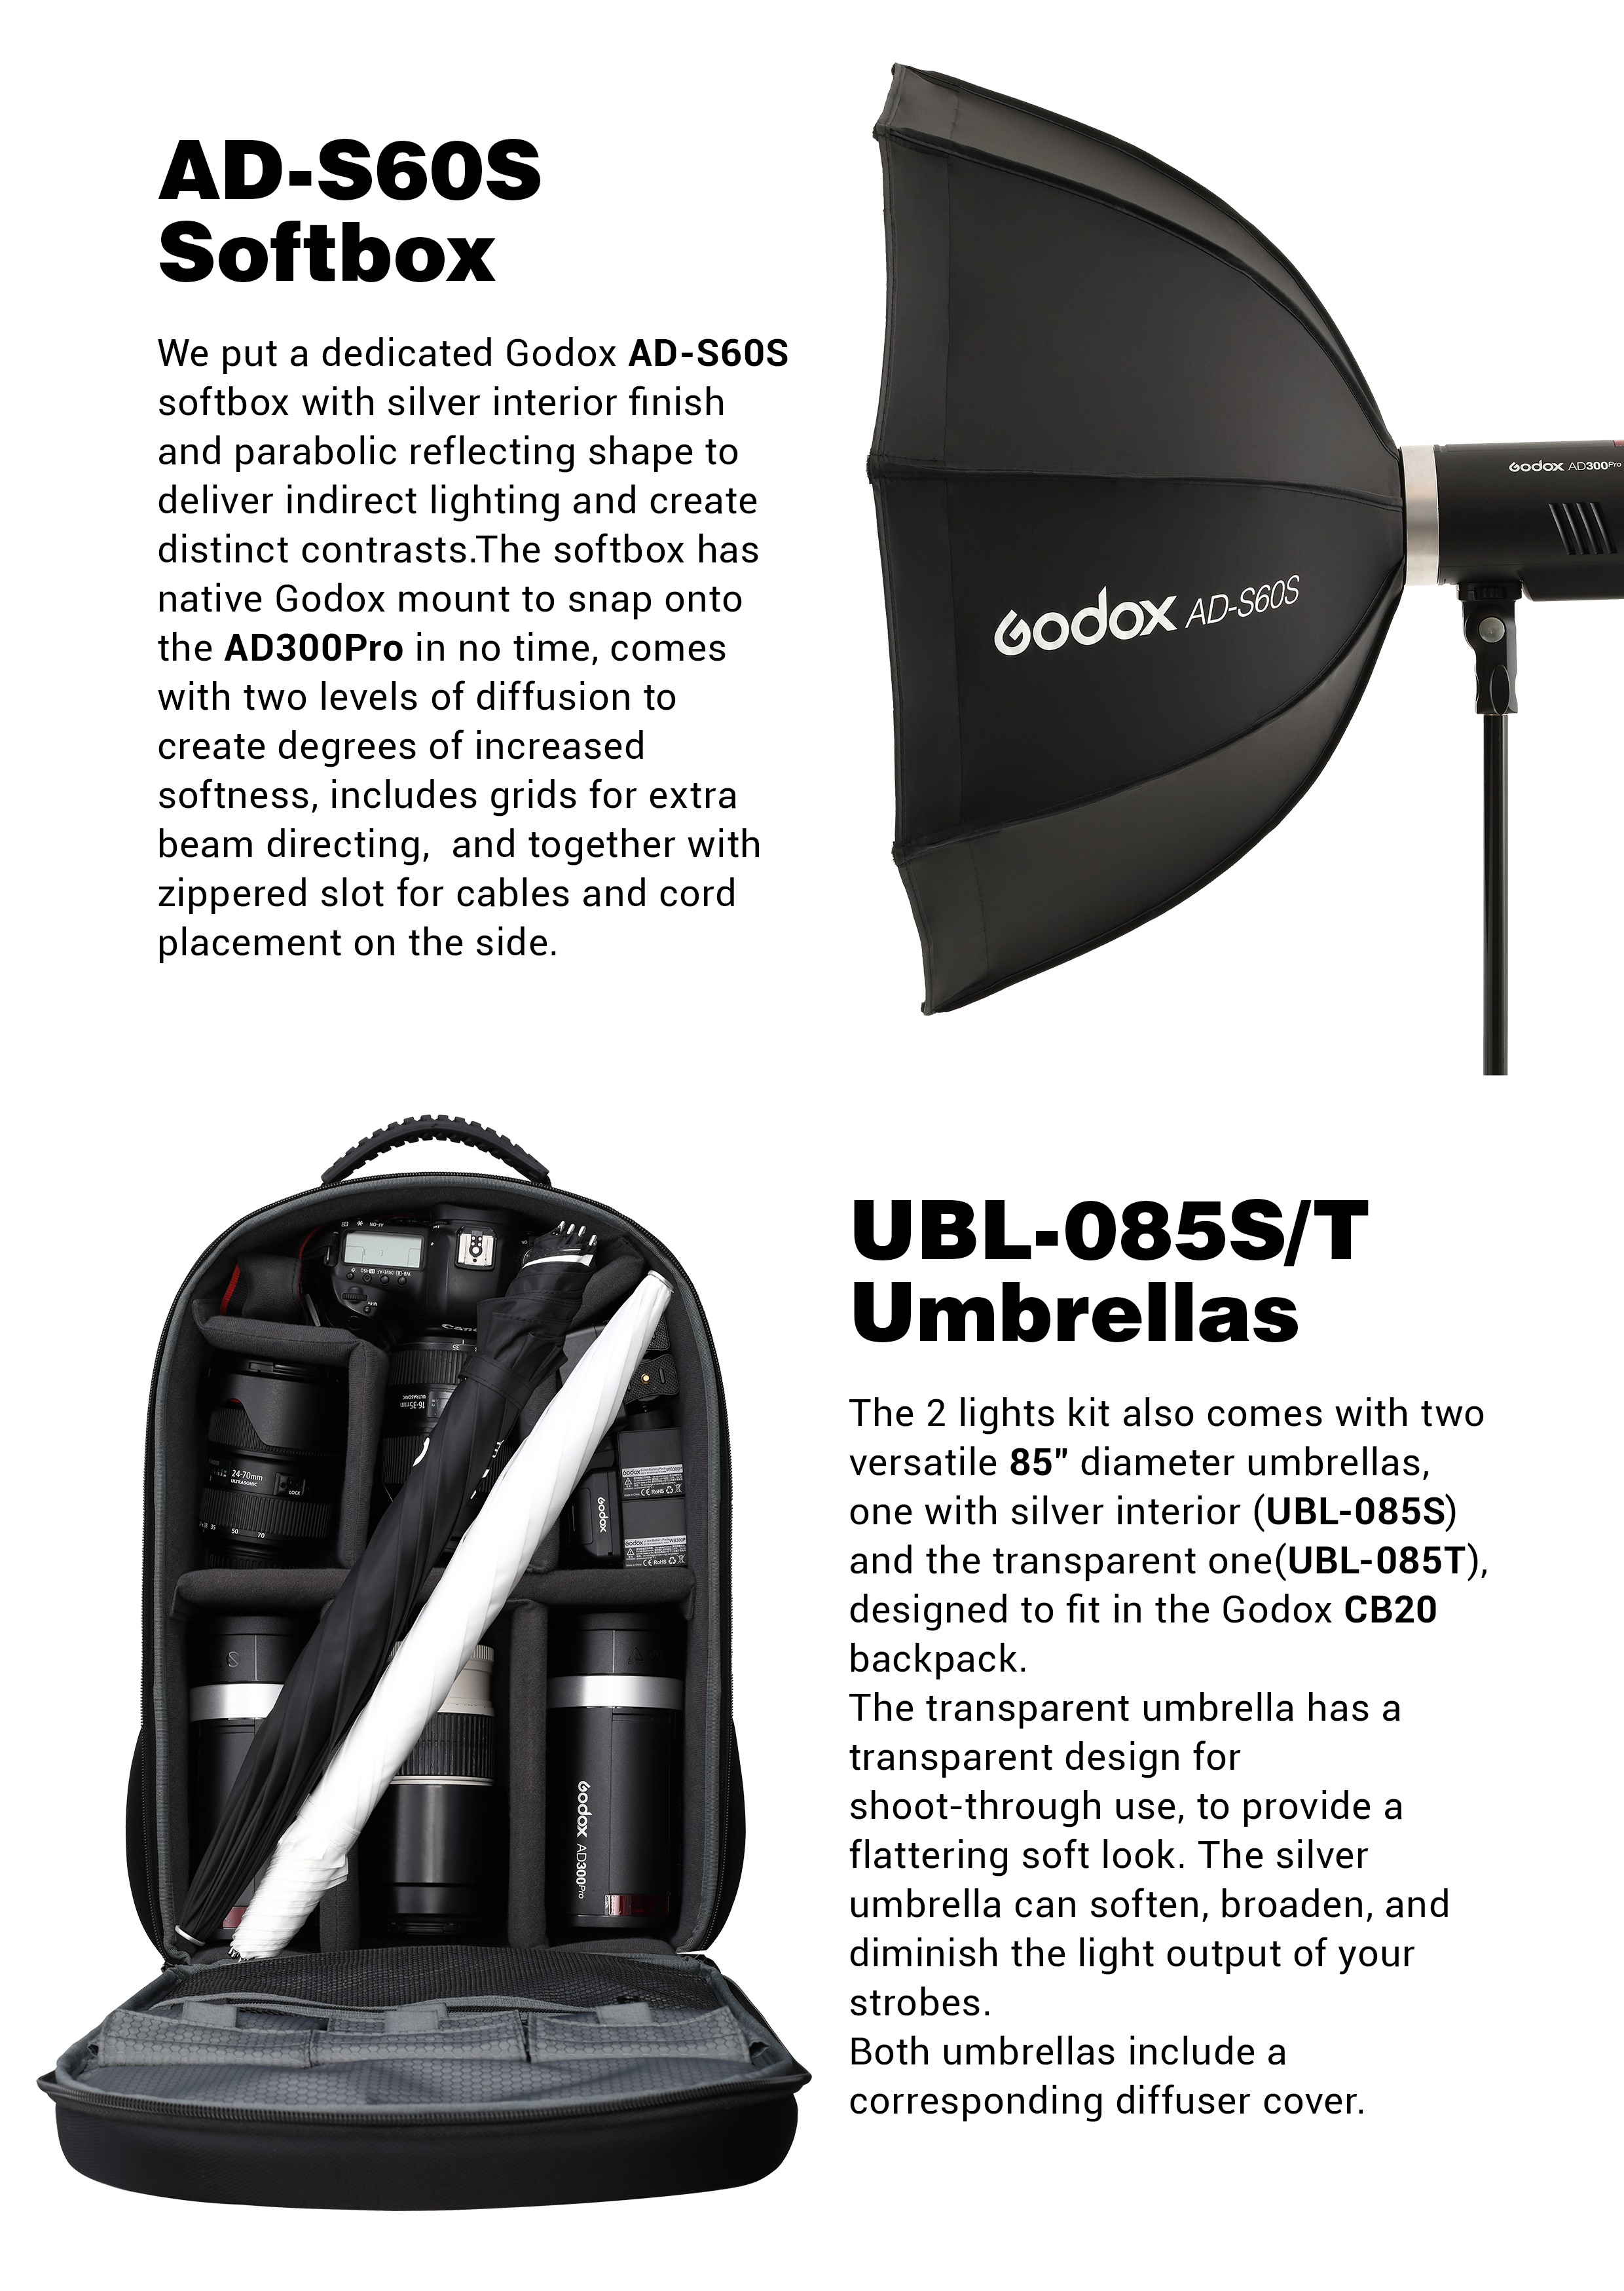 Godox AD-S60S Softbox and UBL-085S/T Umbrellas. 2x AD300Pro pack kit